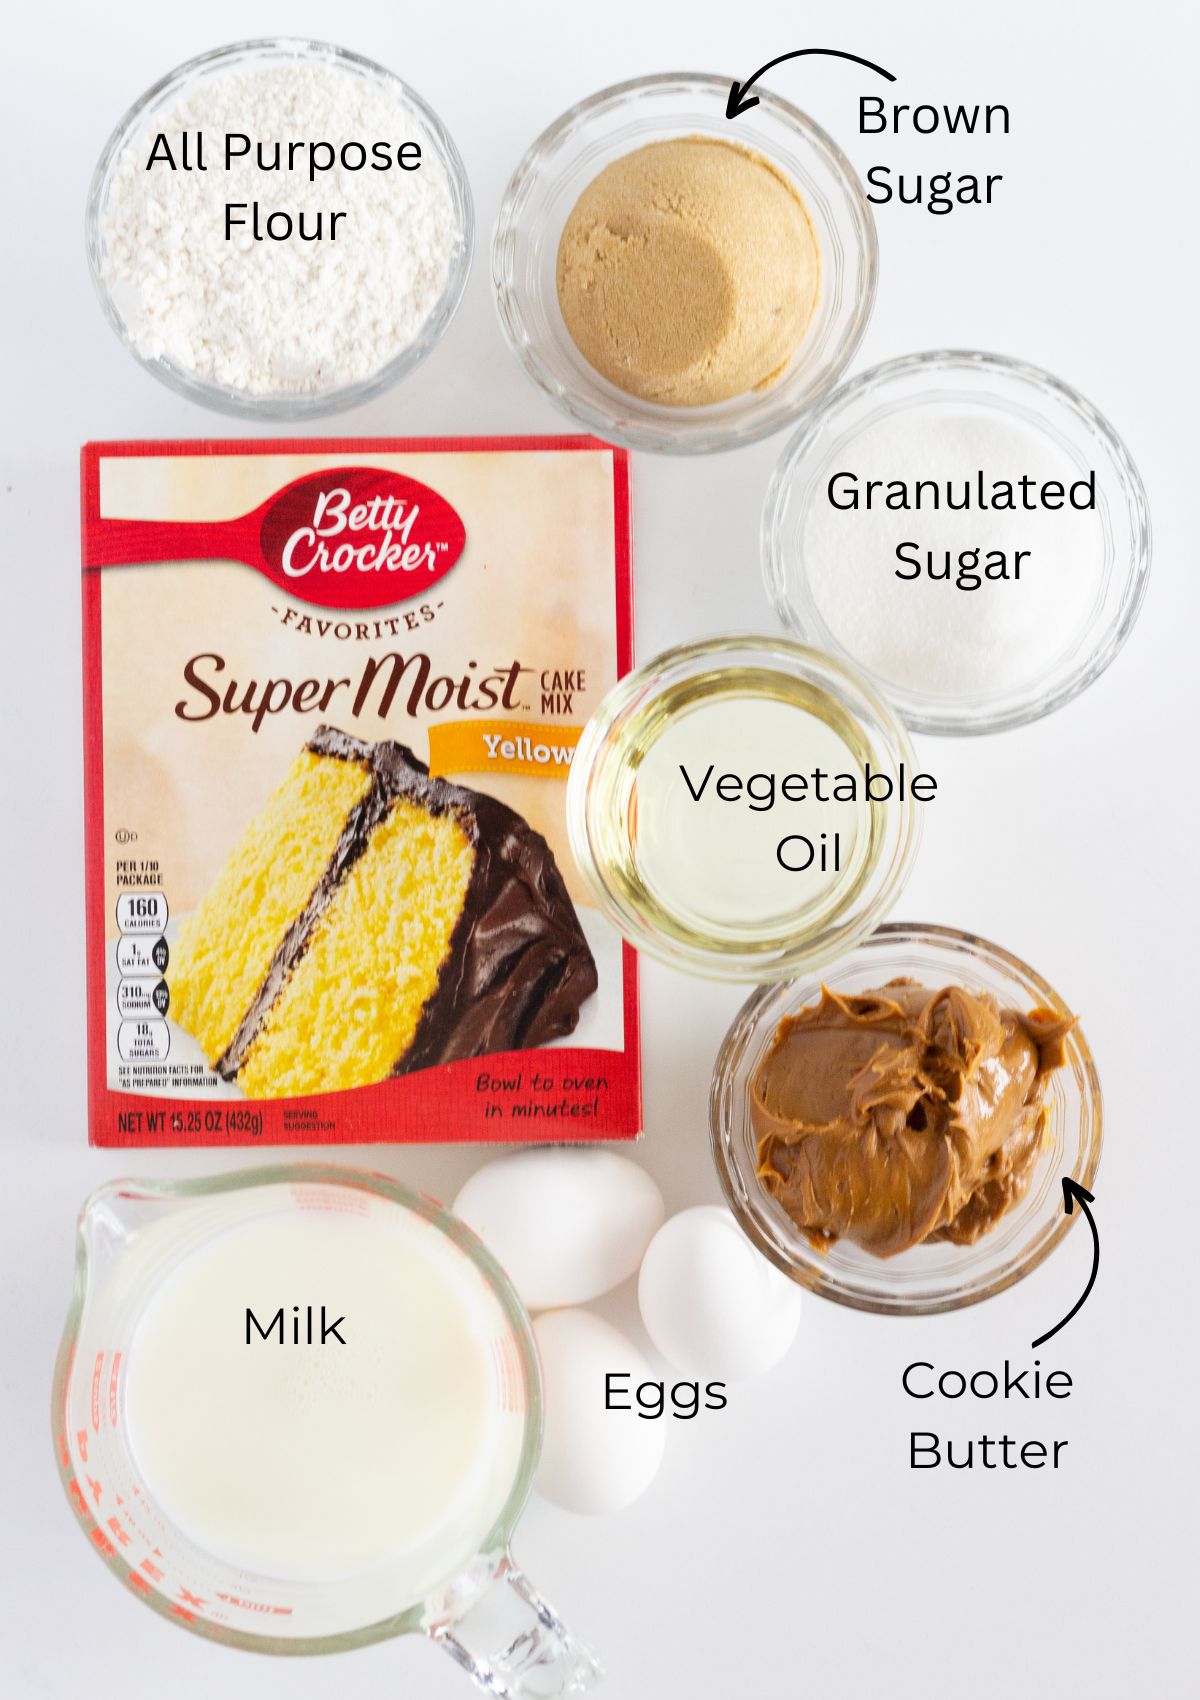 A photo of all of the ingredients needed to make the cookie butter bundt cake.